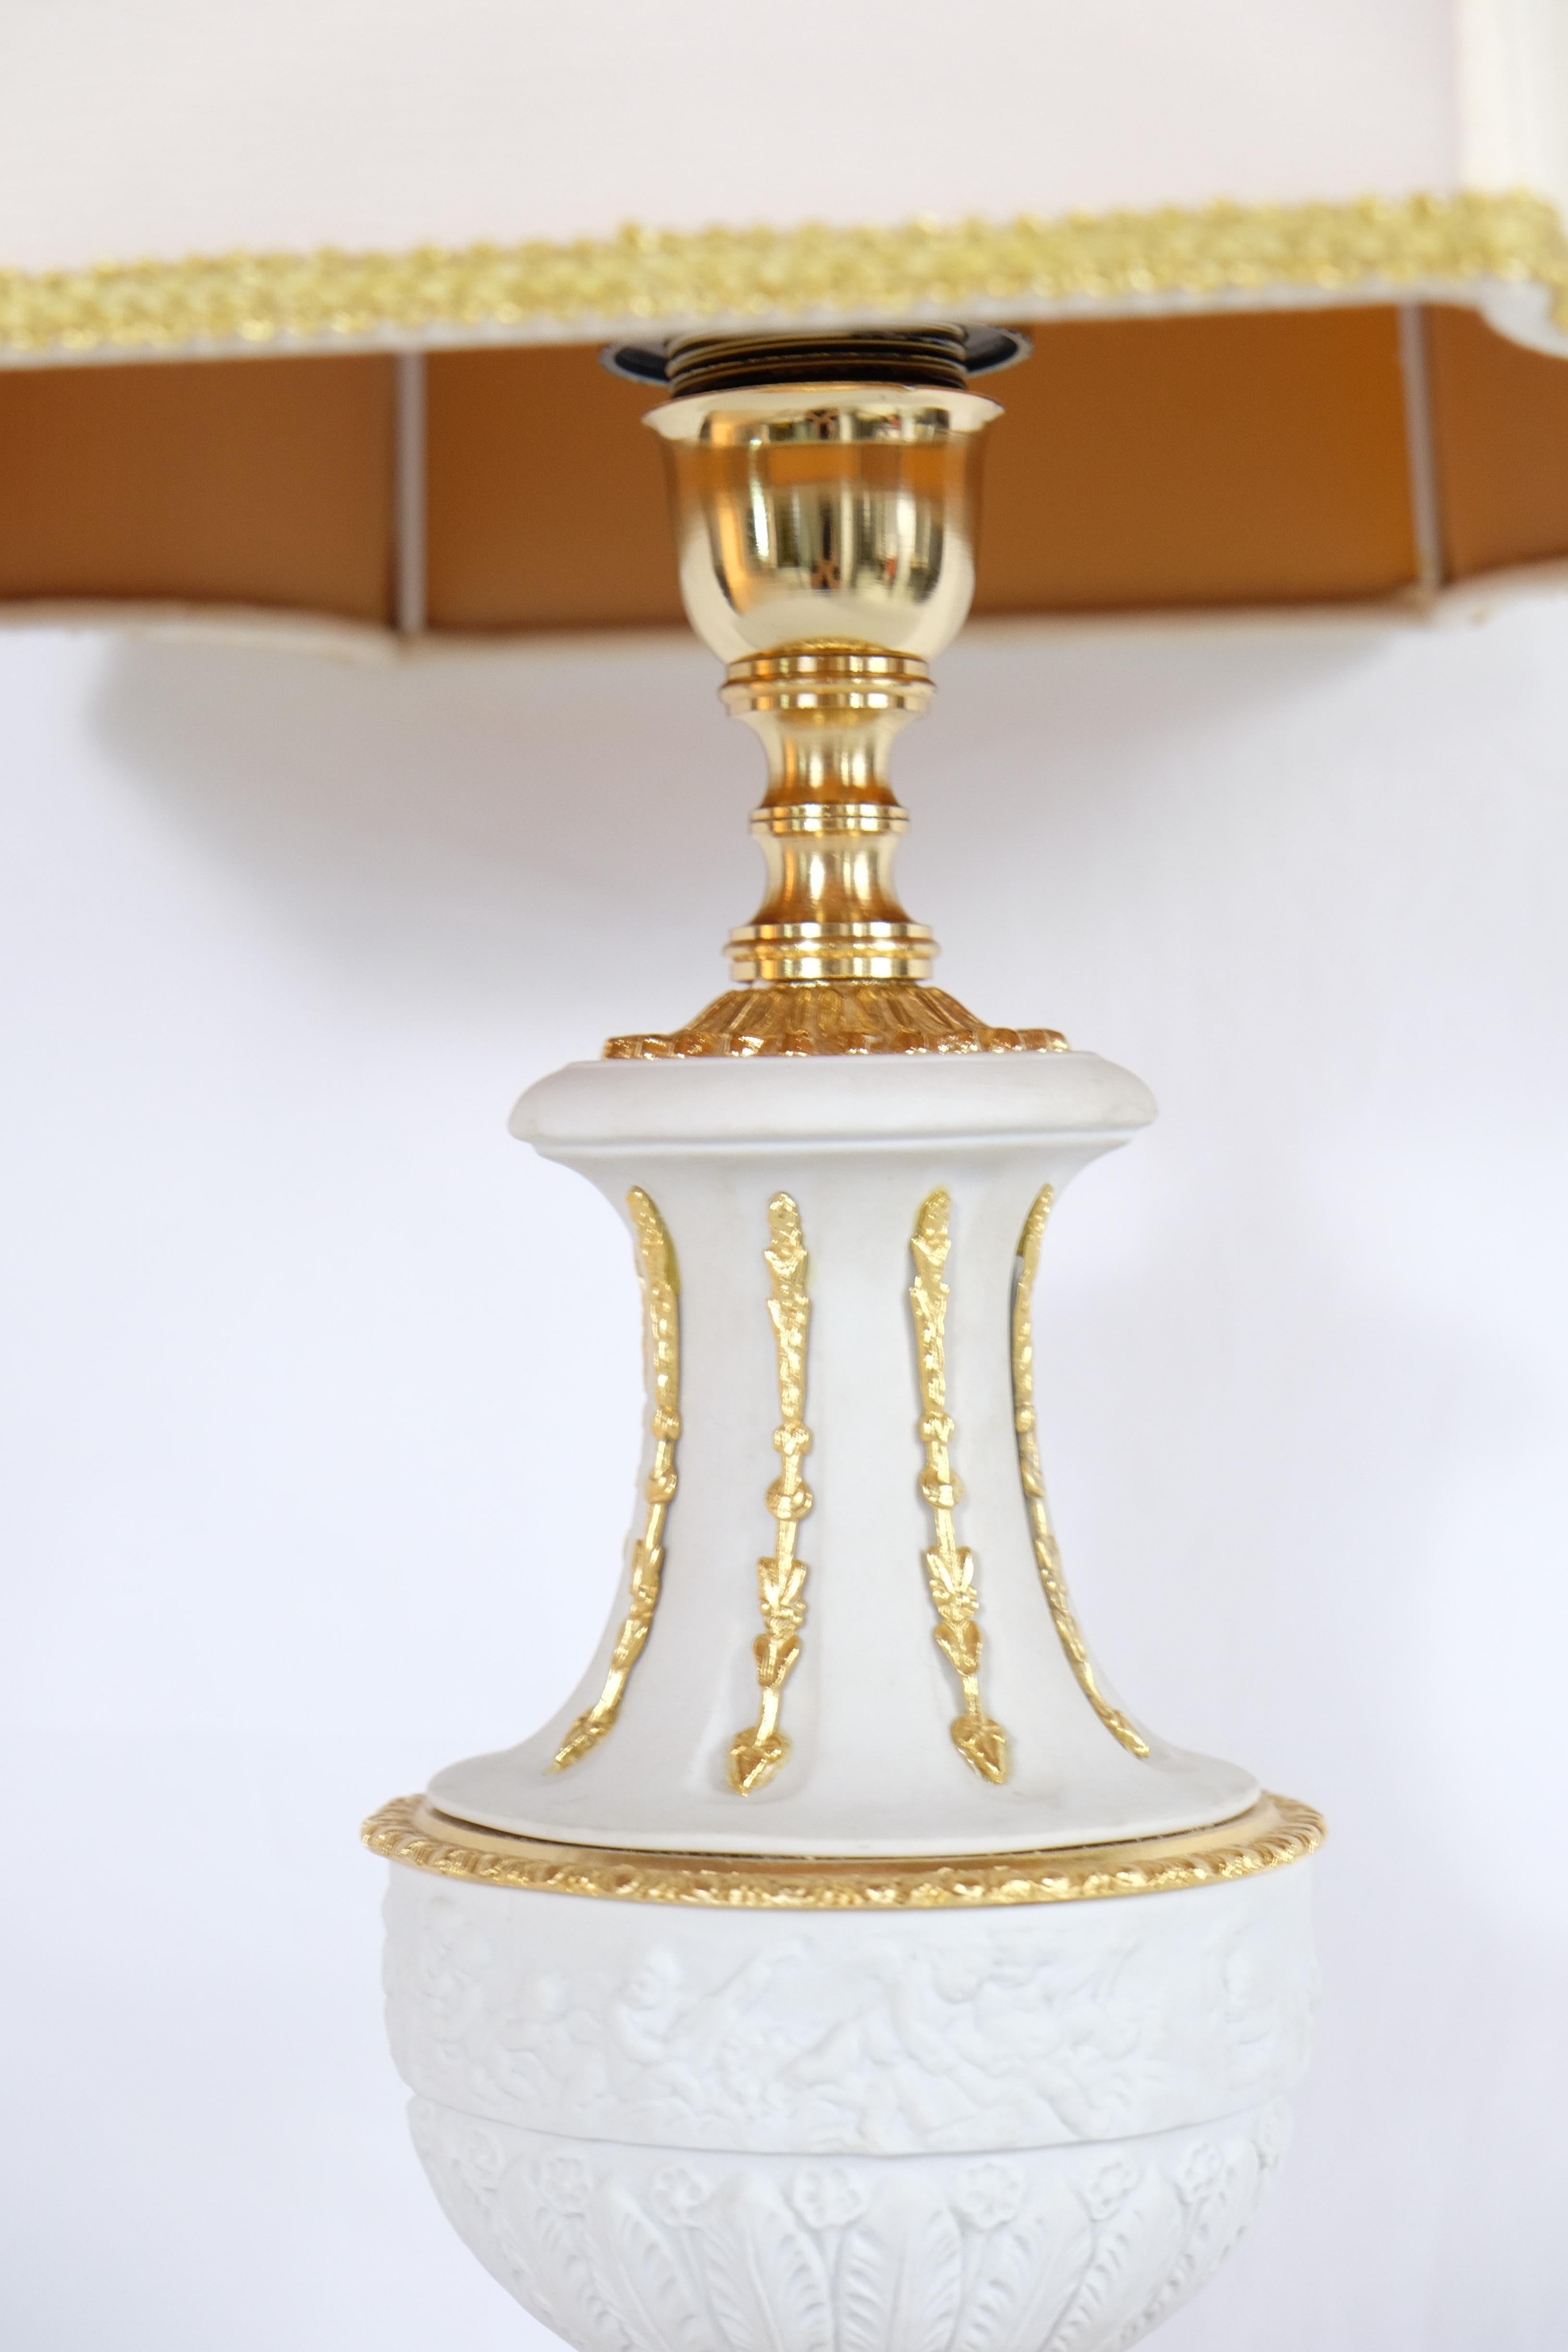 Ceramic Mangani, Italy Classically Designed Porcelain Table Lamp For Sale